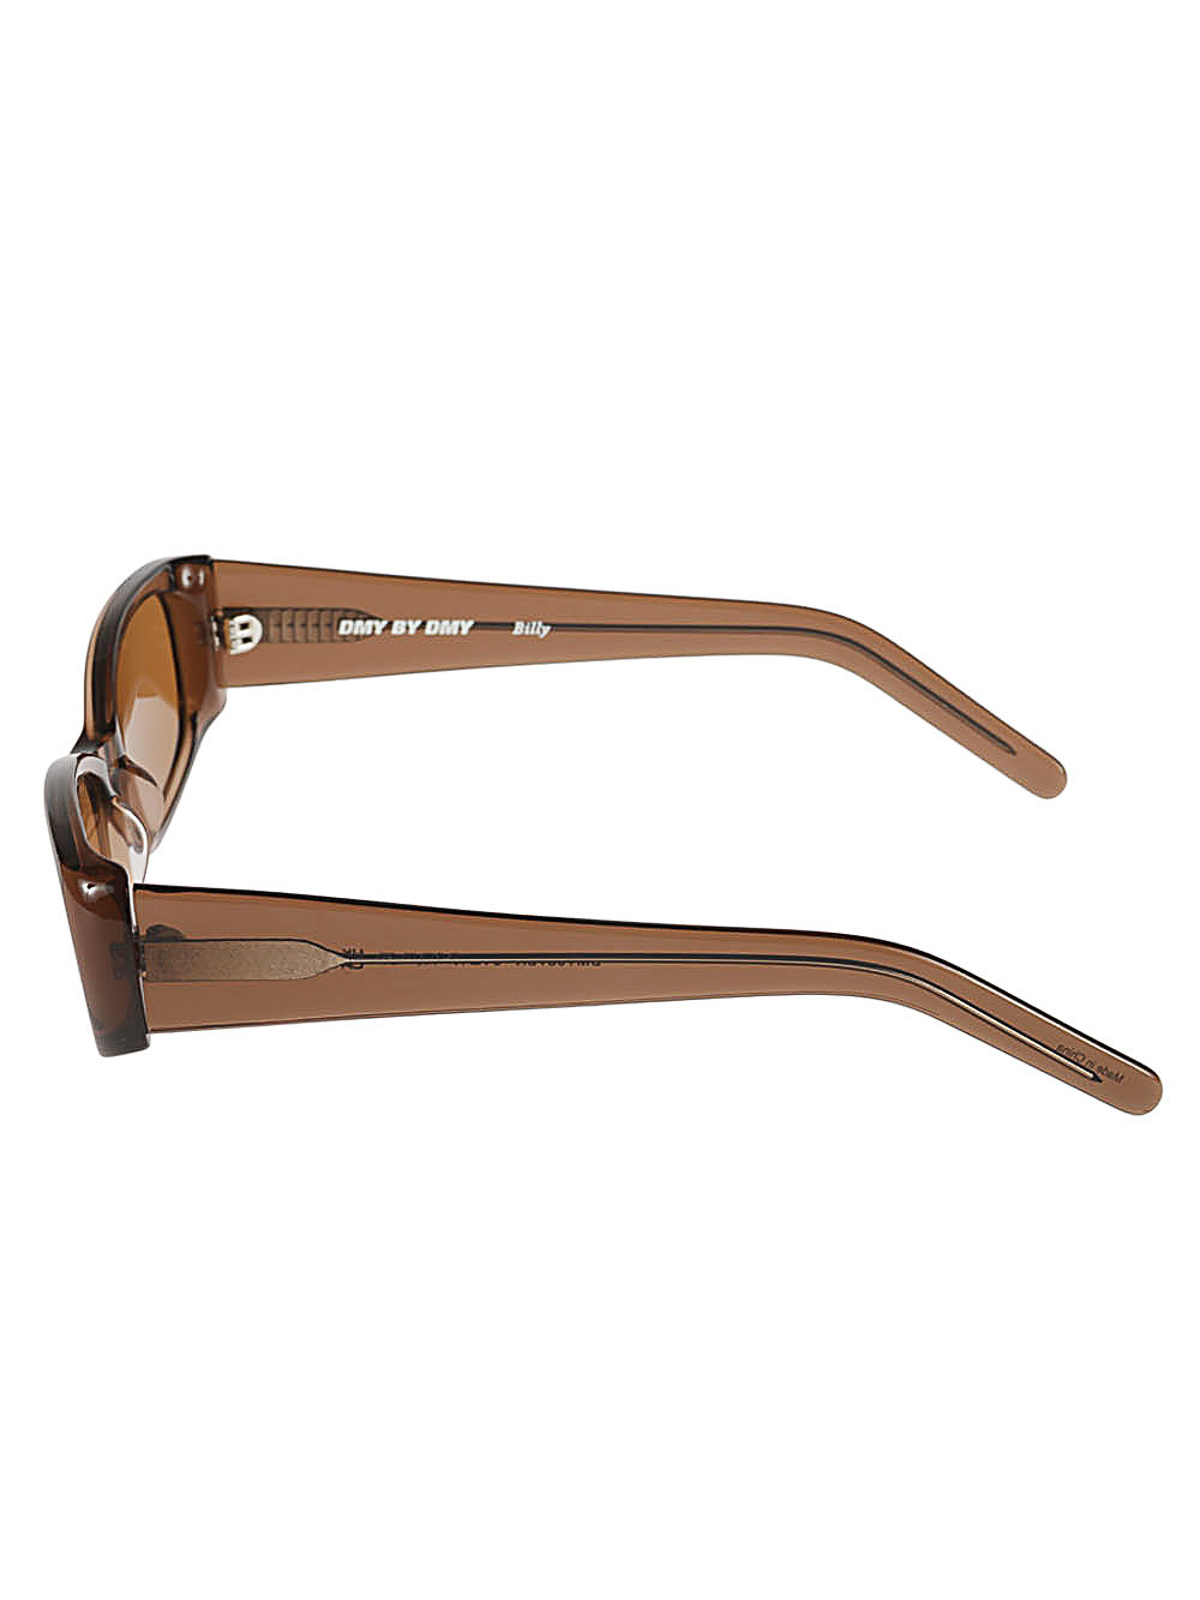 Shop Dmy By Dmy Billy Sunglasses In Brown